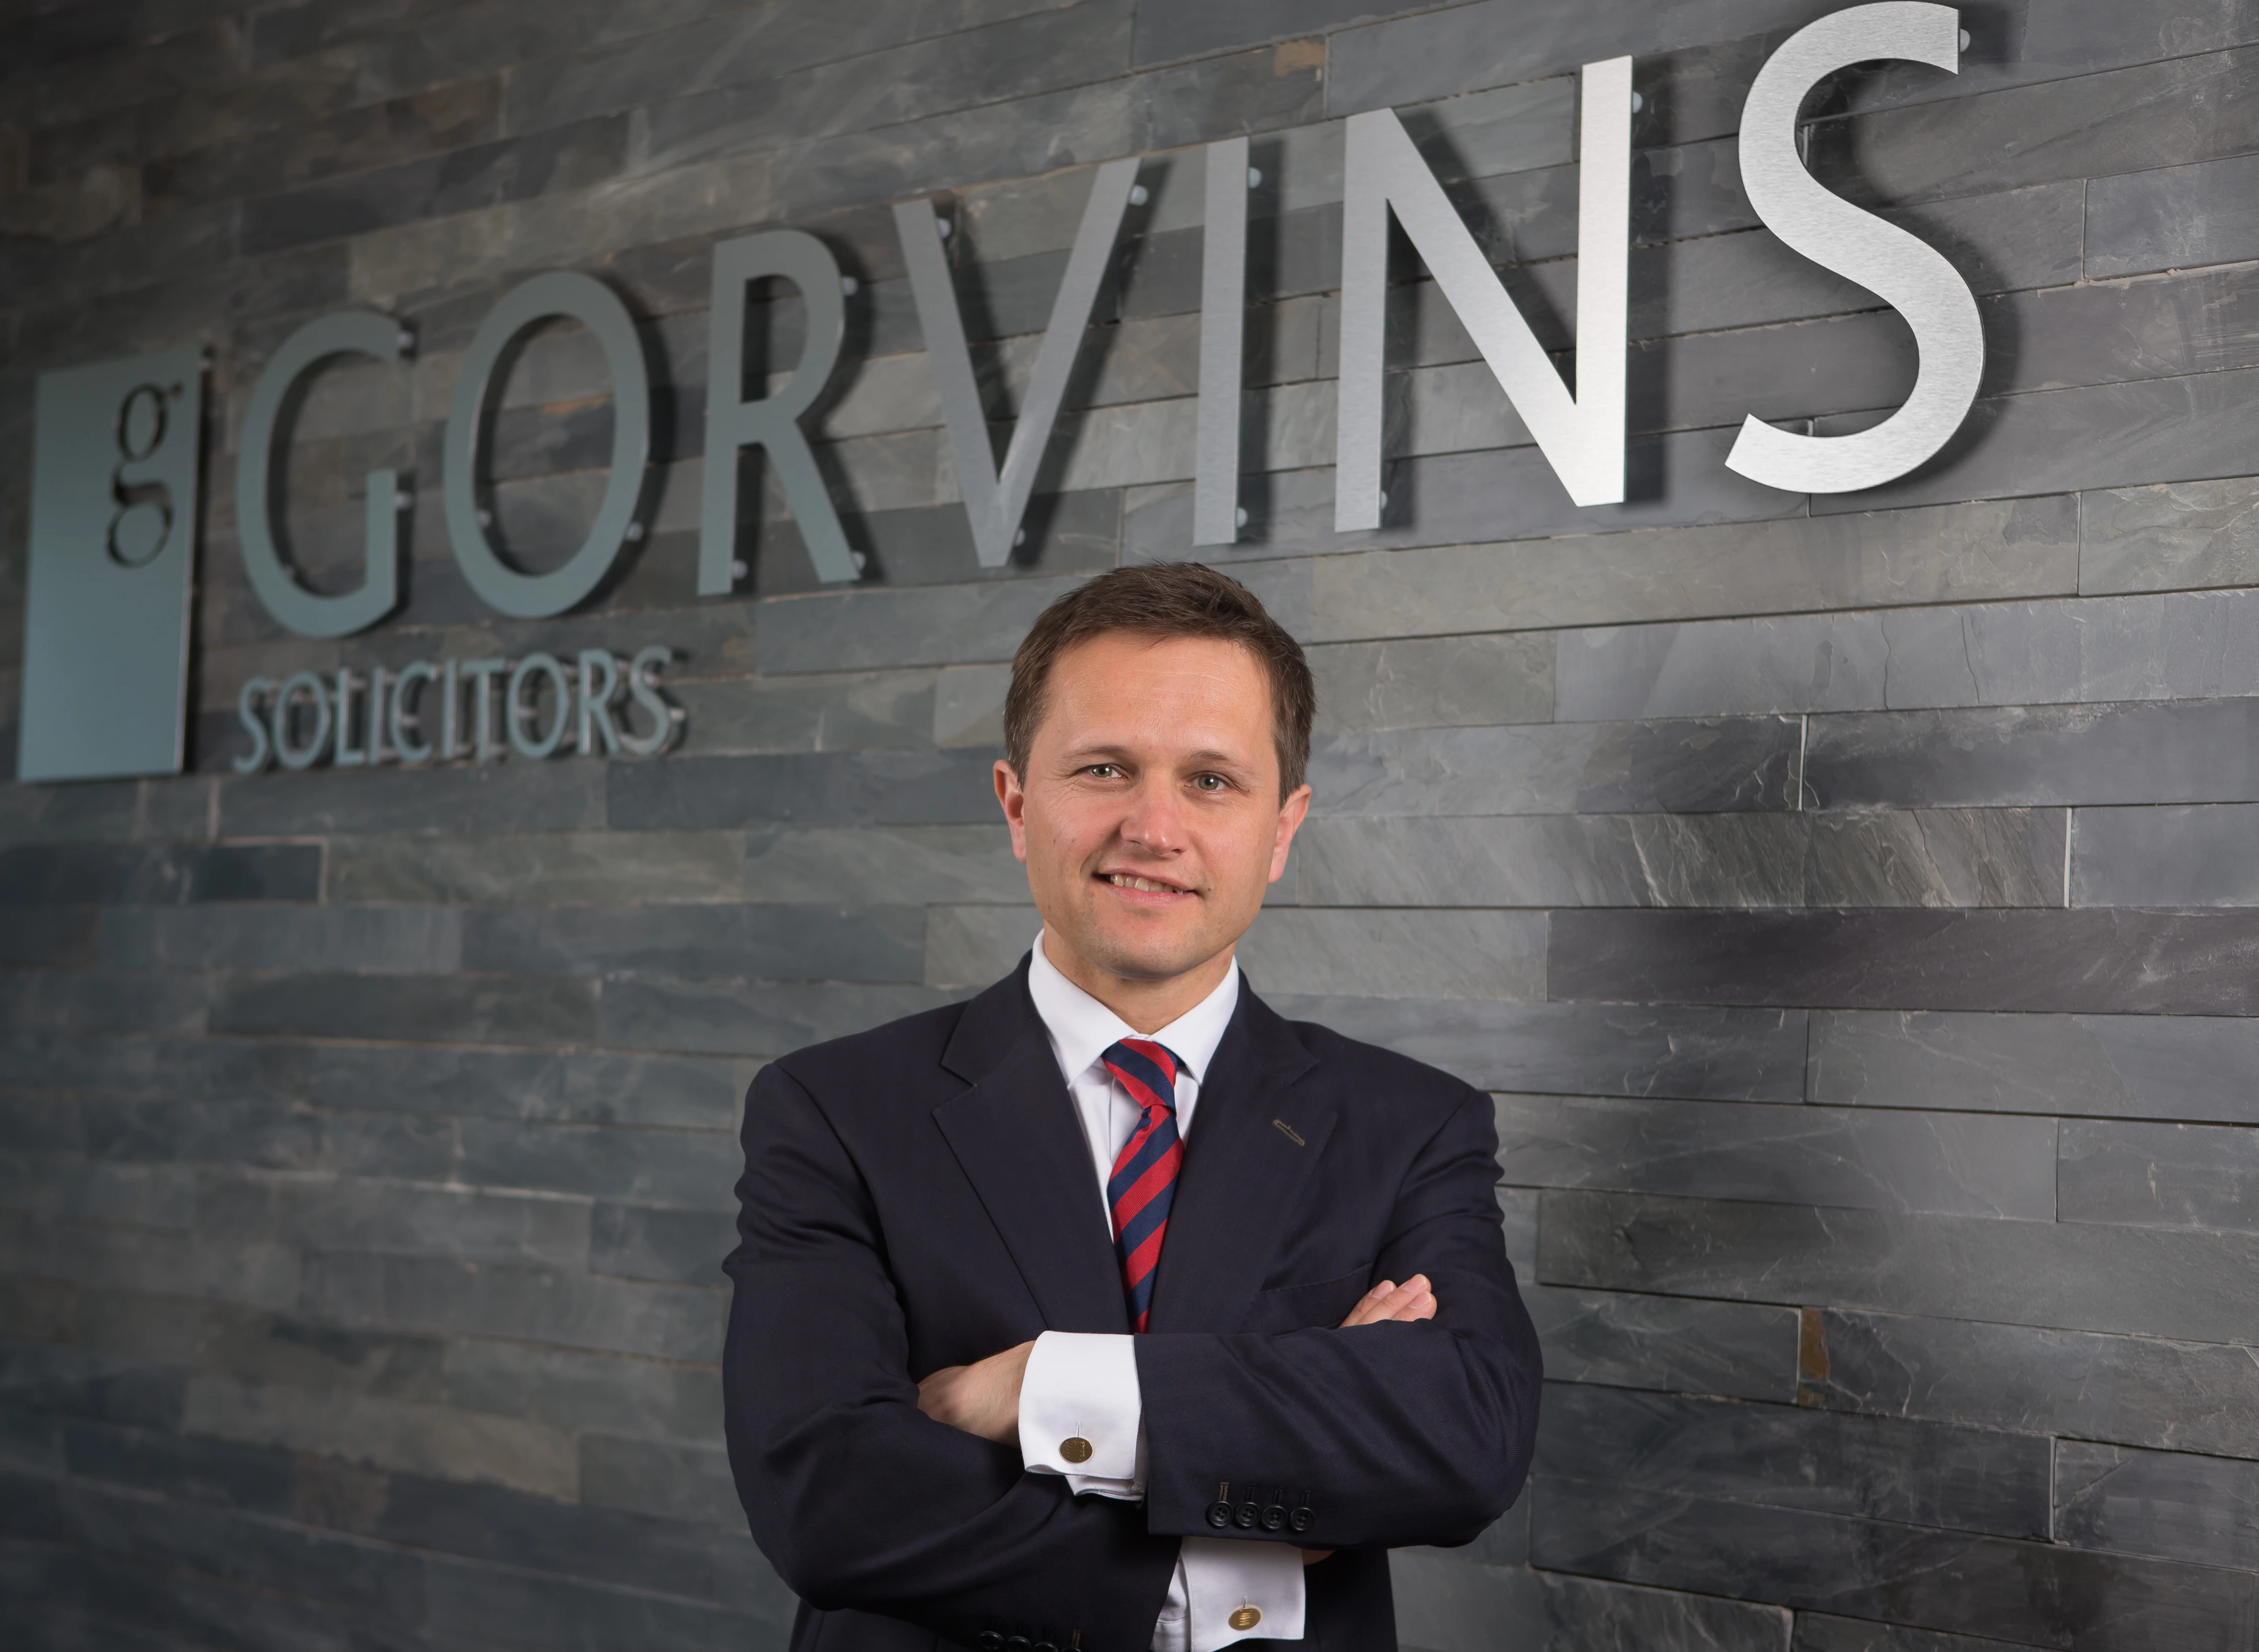 Martin Hoare, Managing Partner and Head of Commercial Property